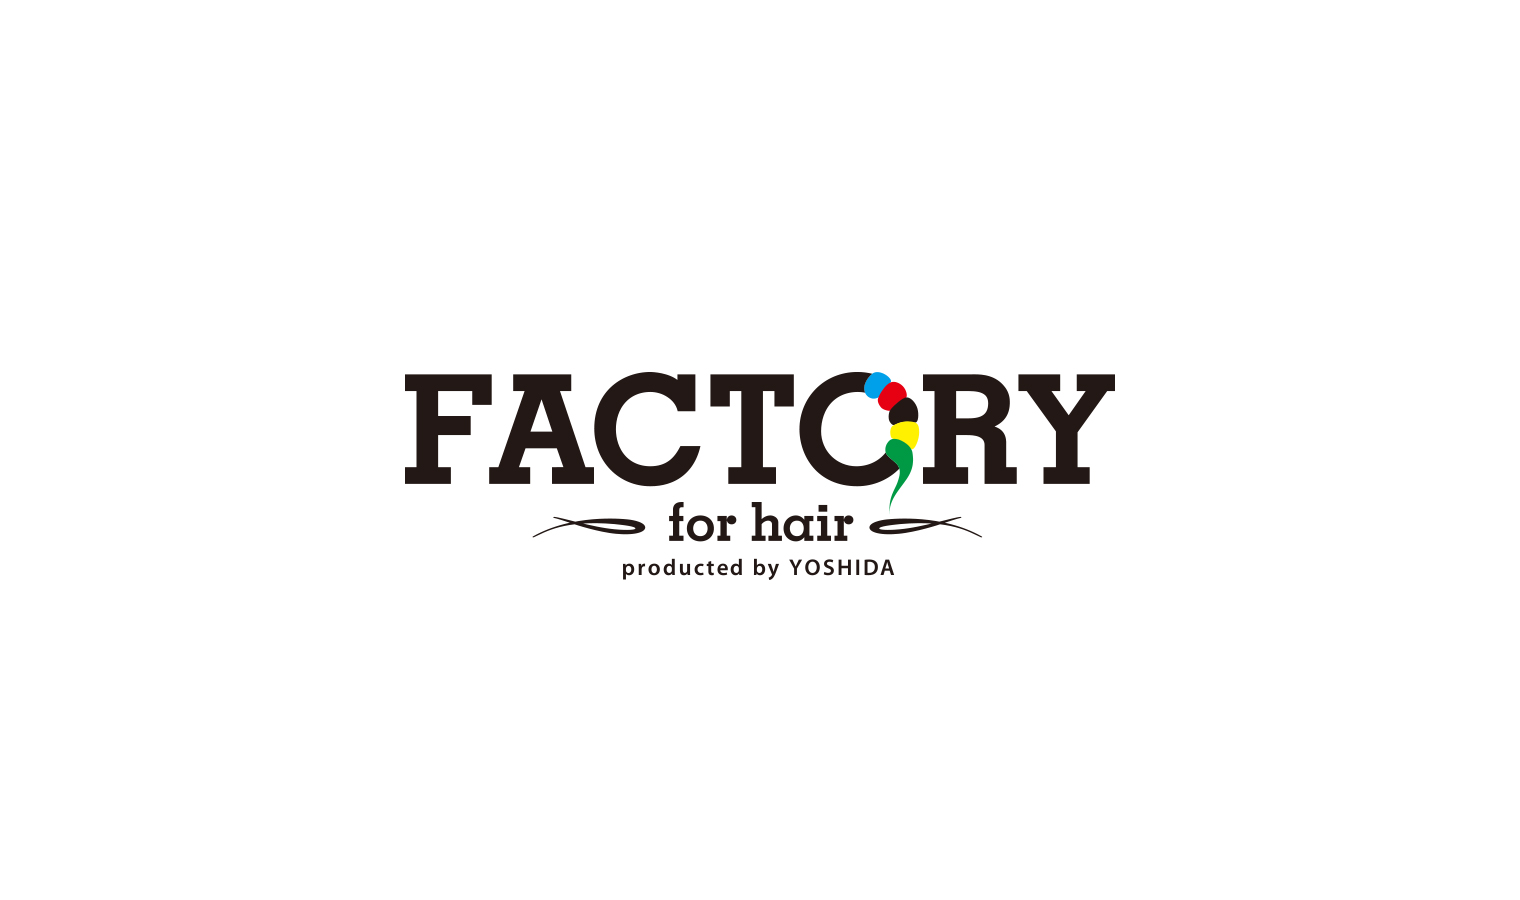 FACTORY for hair